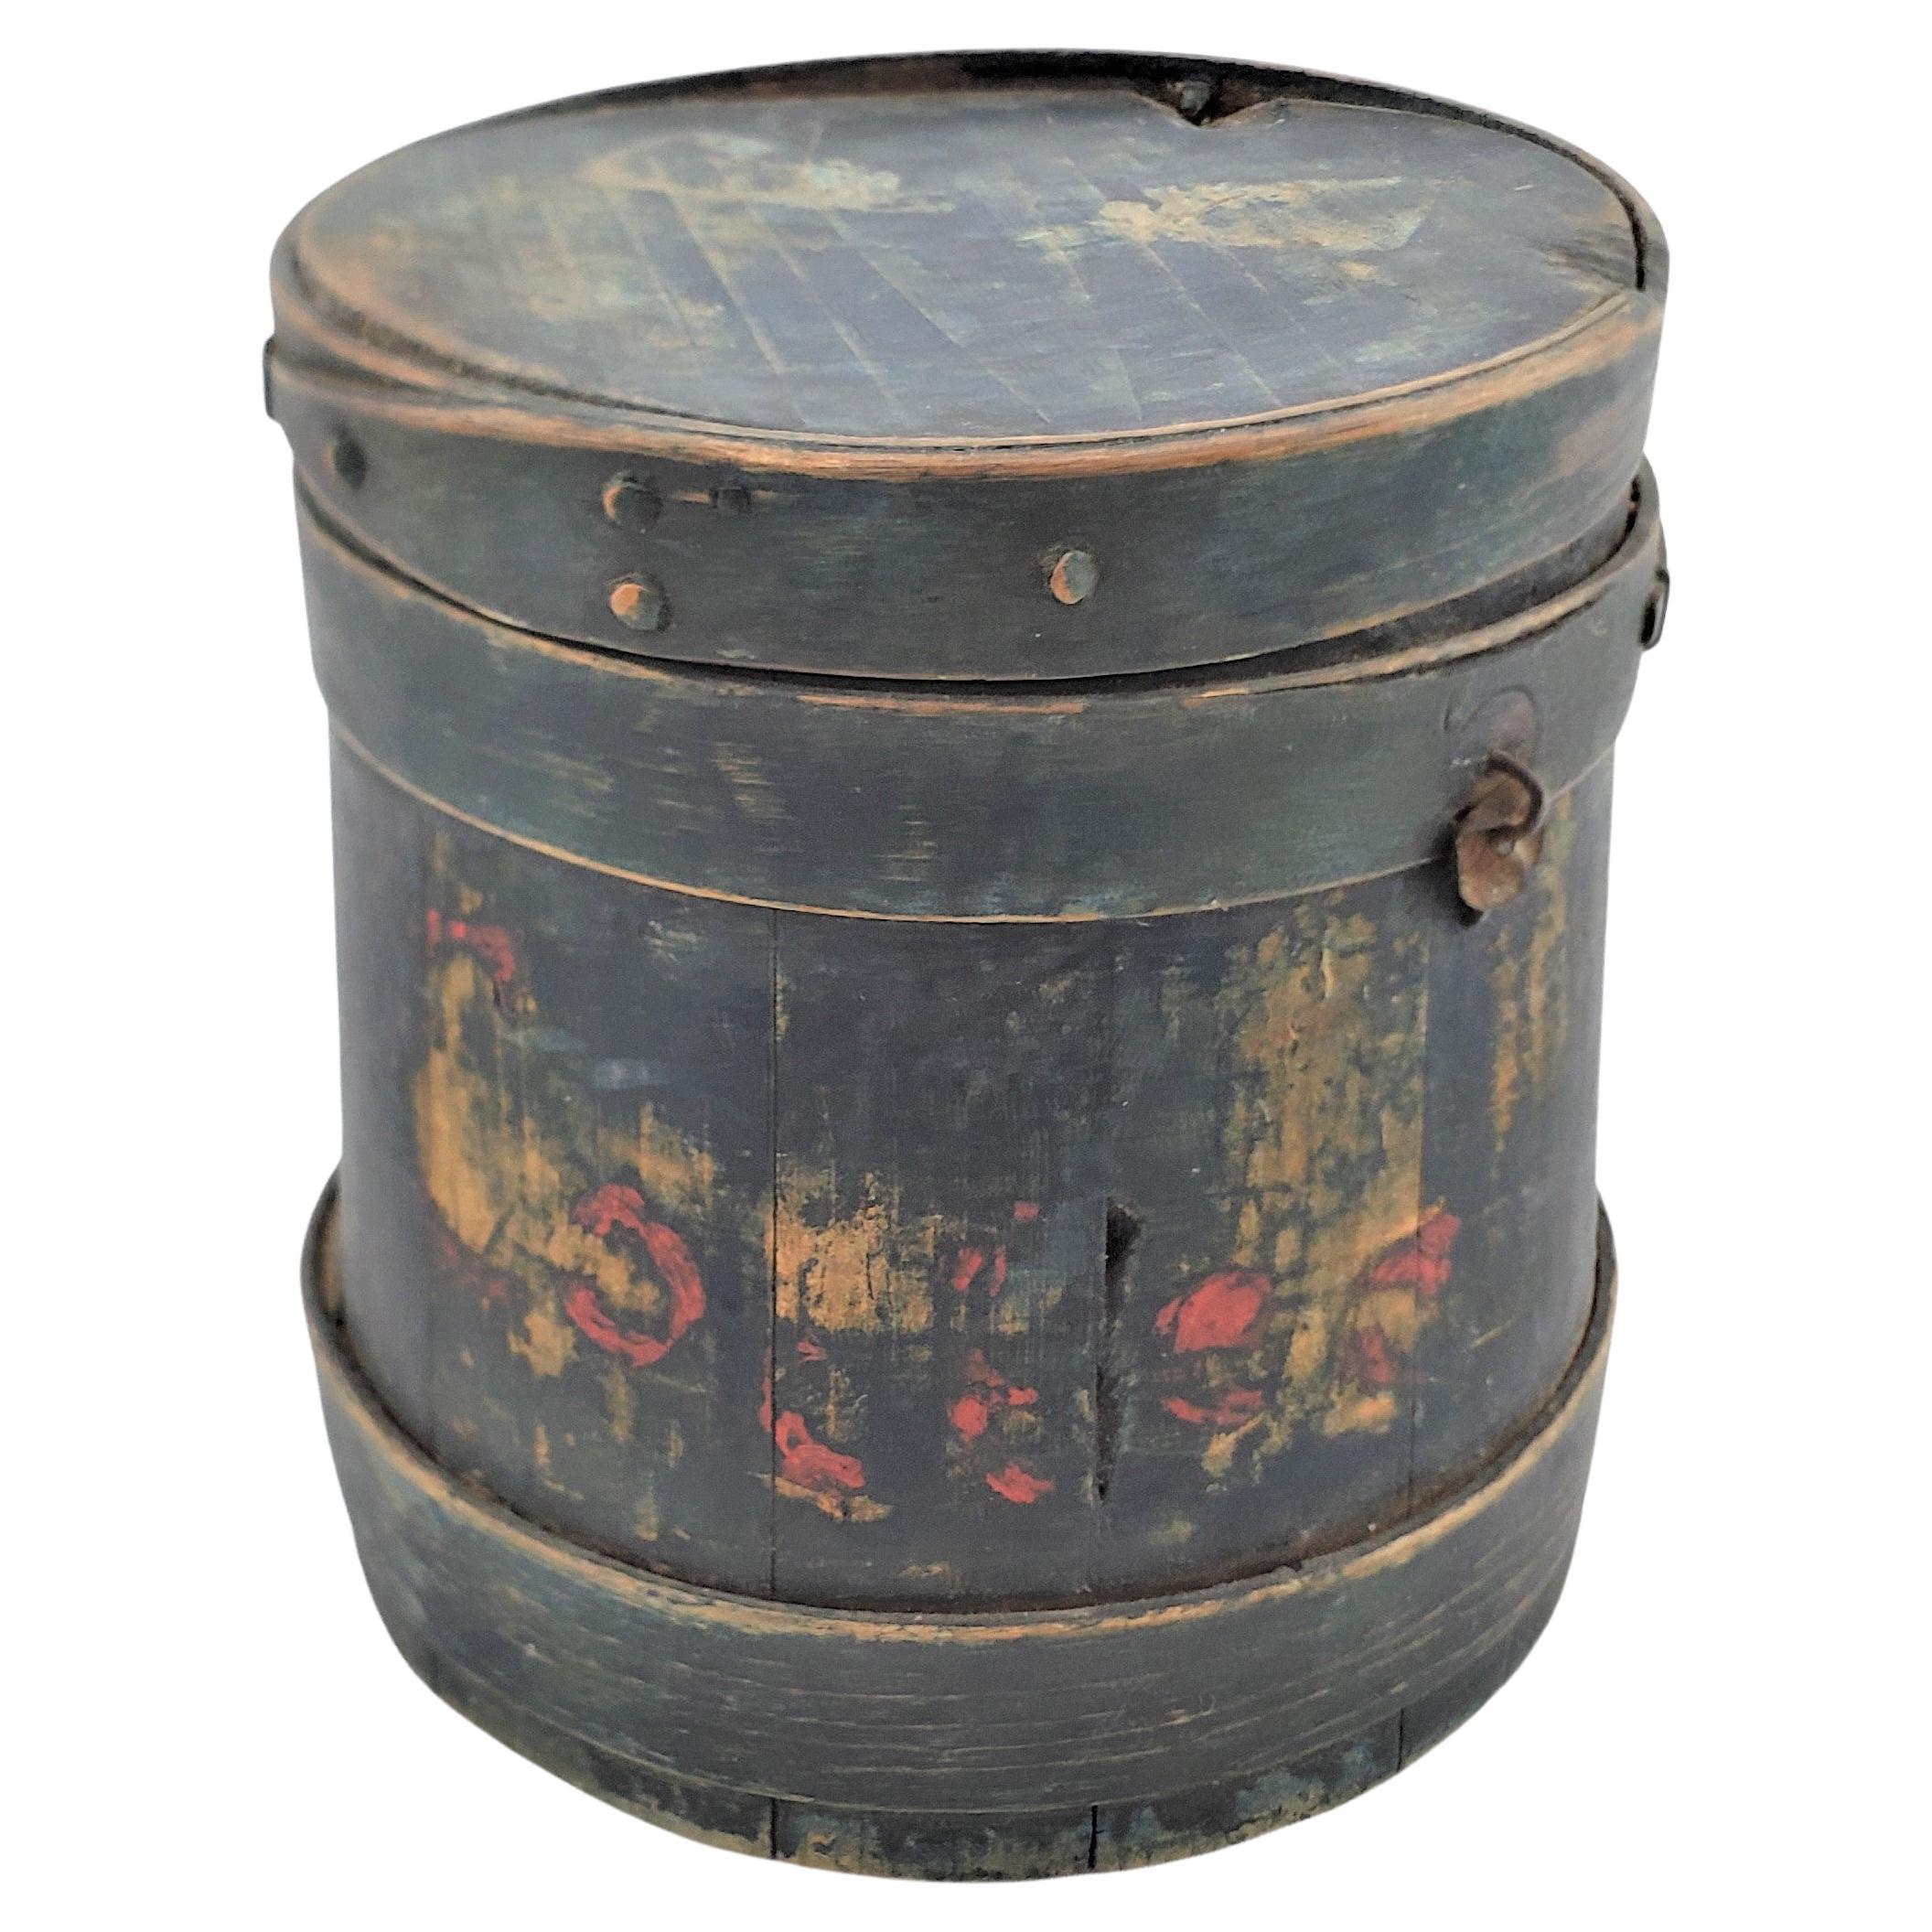 Antique Painted Primitive Covered & Finger Staved Sugar Pail, Bucket or Firkin